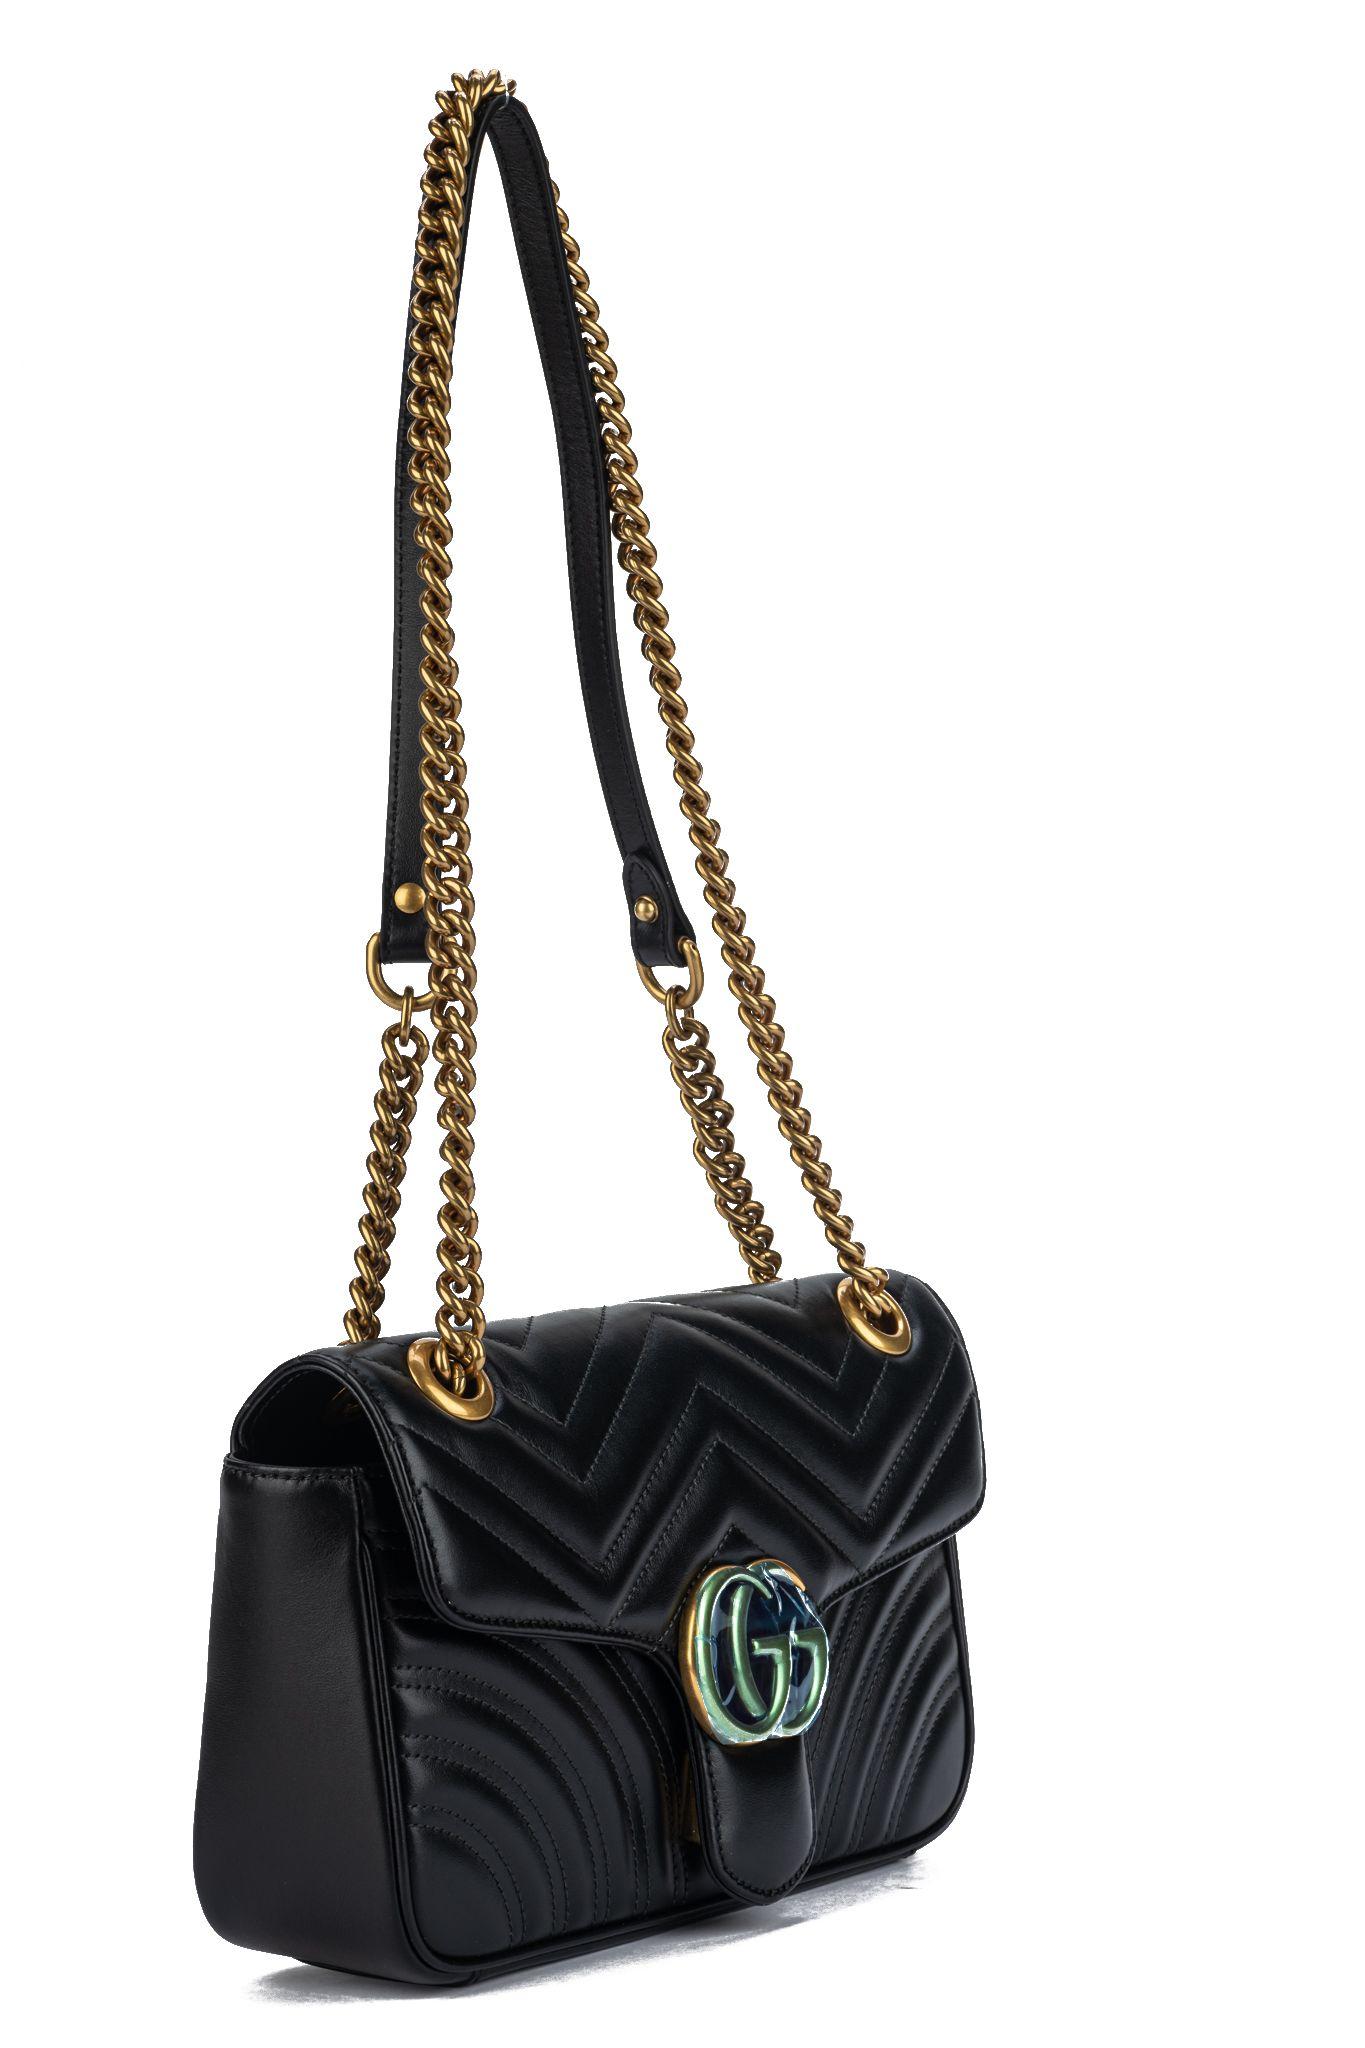 Gucci brand new marmont small handbag in black leather and bronze hardware. Shoulder drop 12”/22”. Comes with booklet, original dust cover and plastic on hardware.
